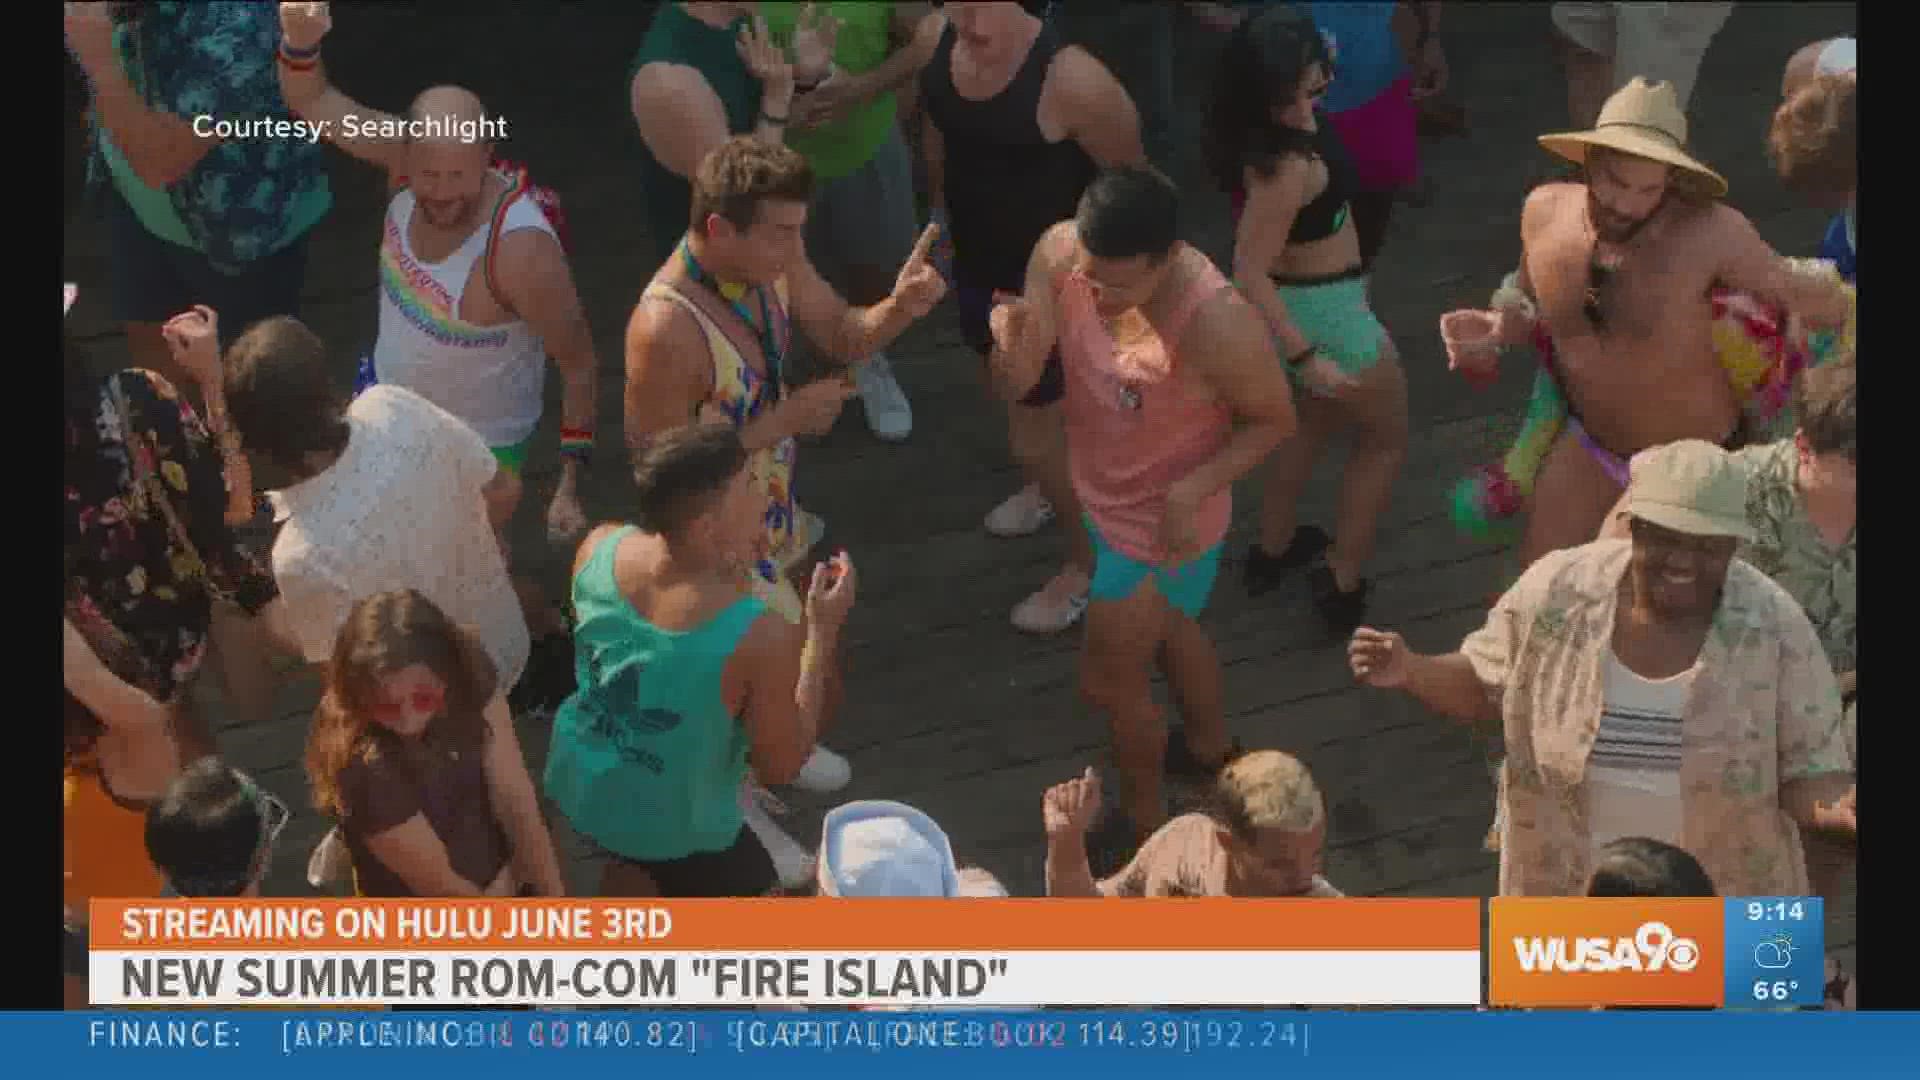 New rom-com "Fire Island" follows a group of close friends on an adventurous vacation. The movie features a diverse cast that also represents the LGBTQ community.